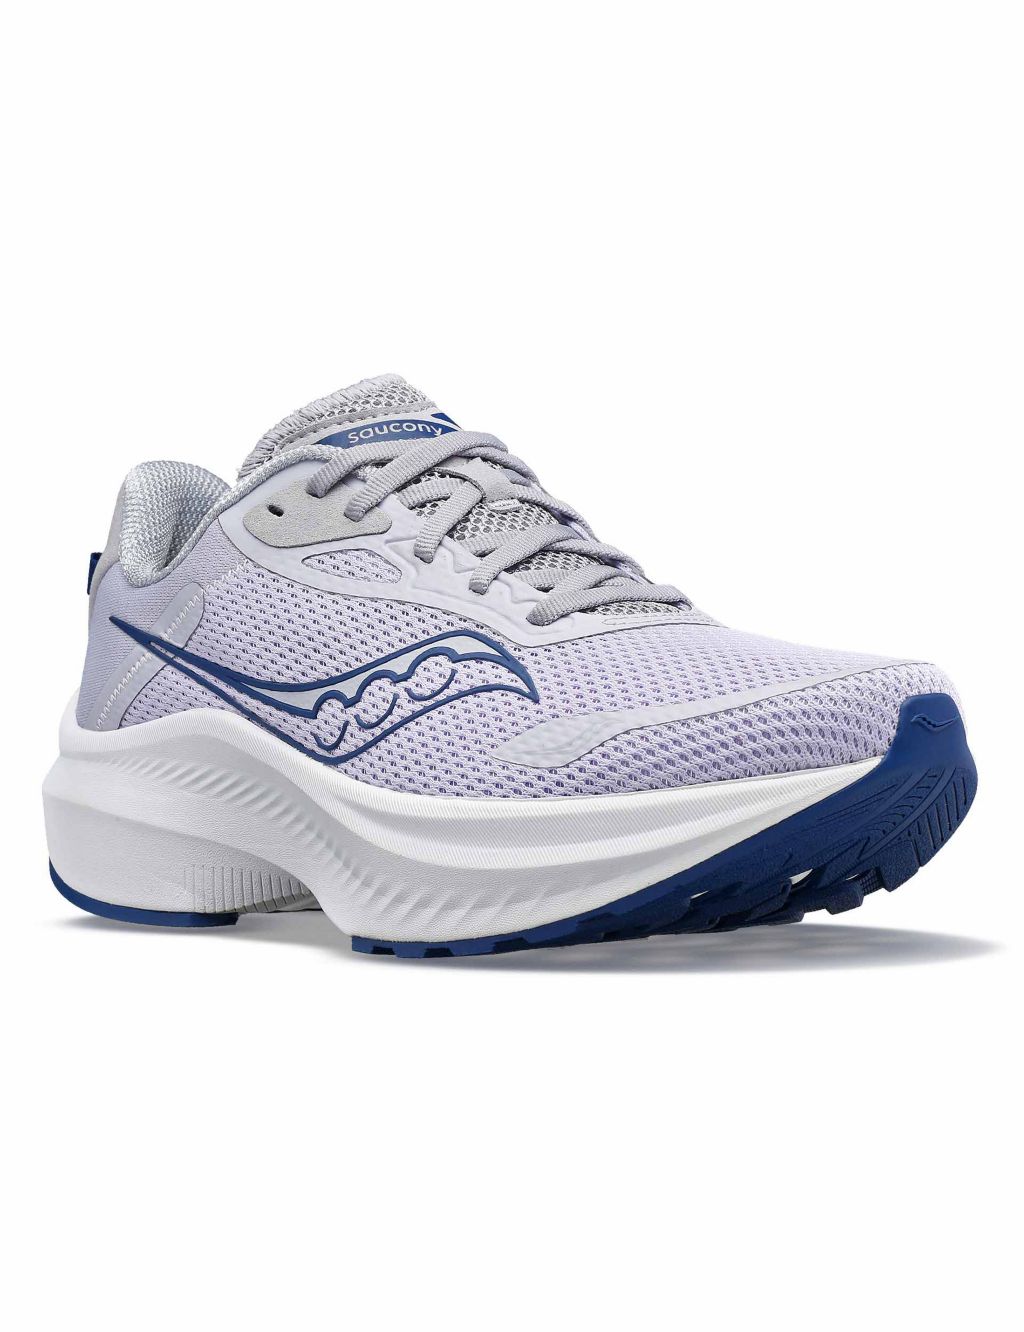 Axon 3 Trainers image 2